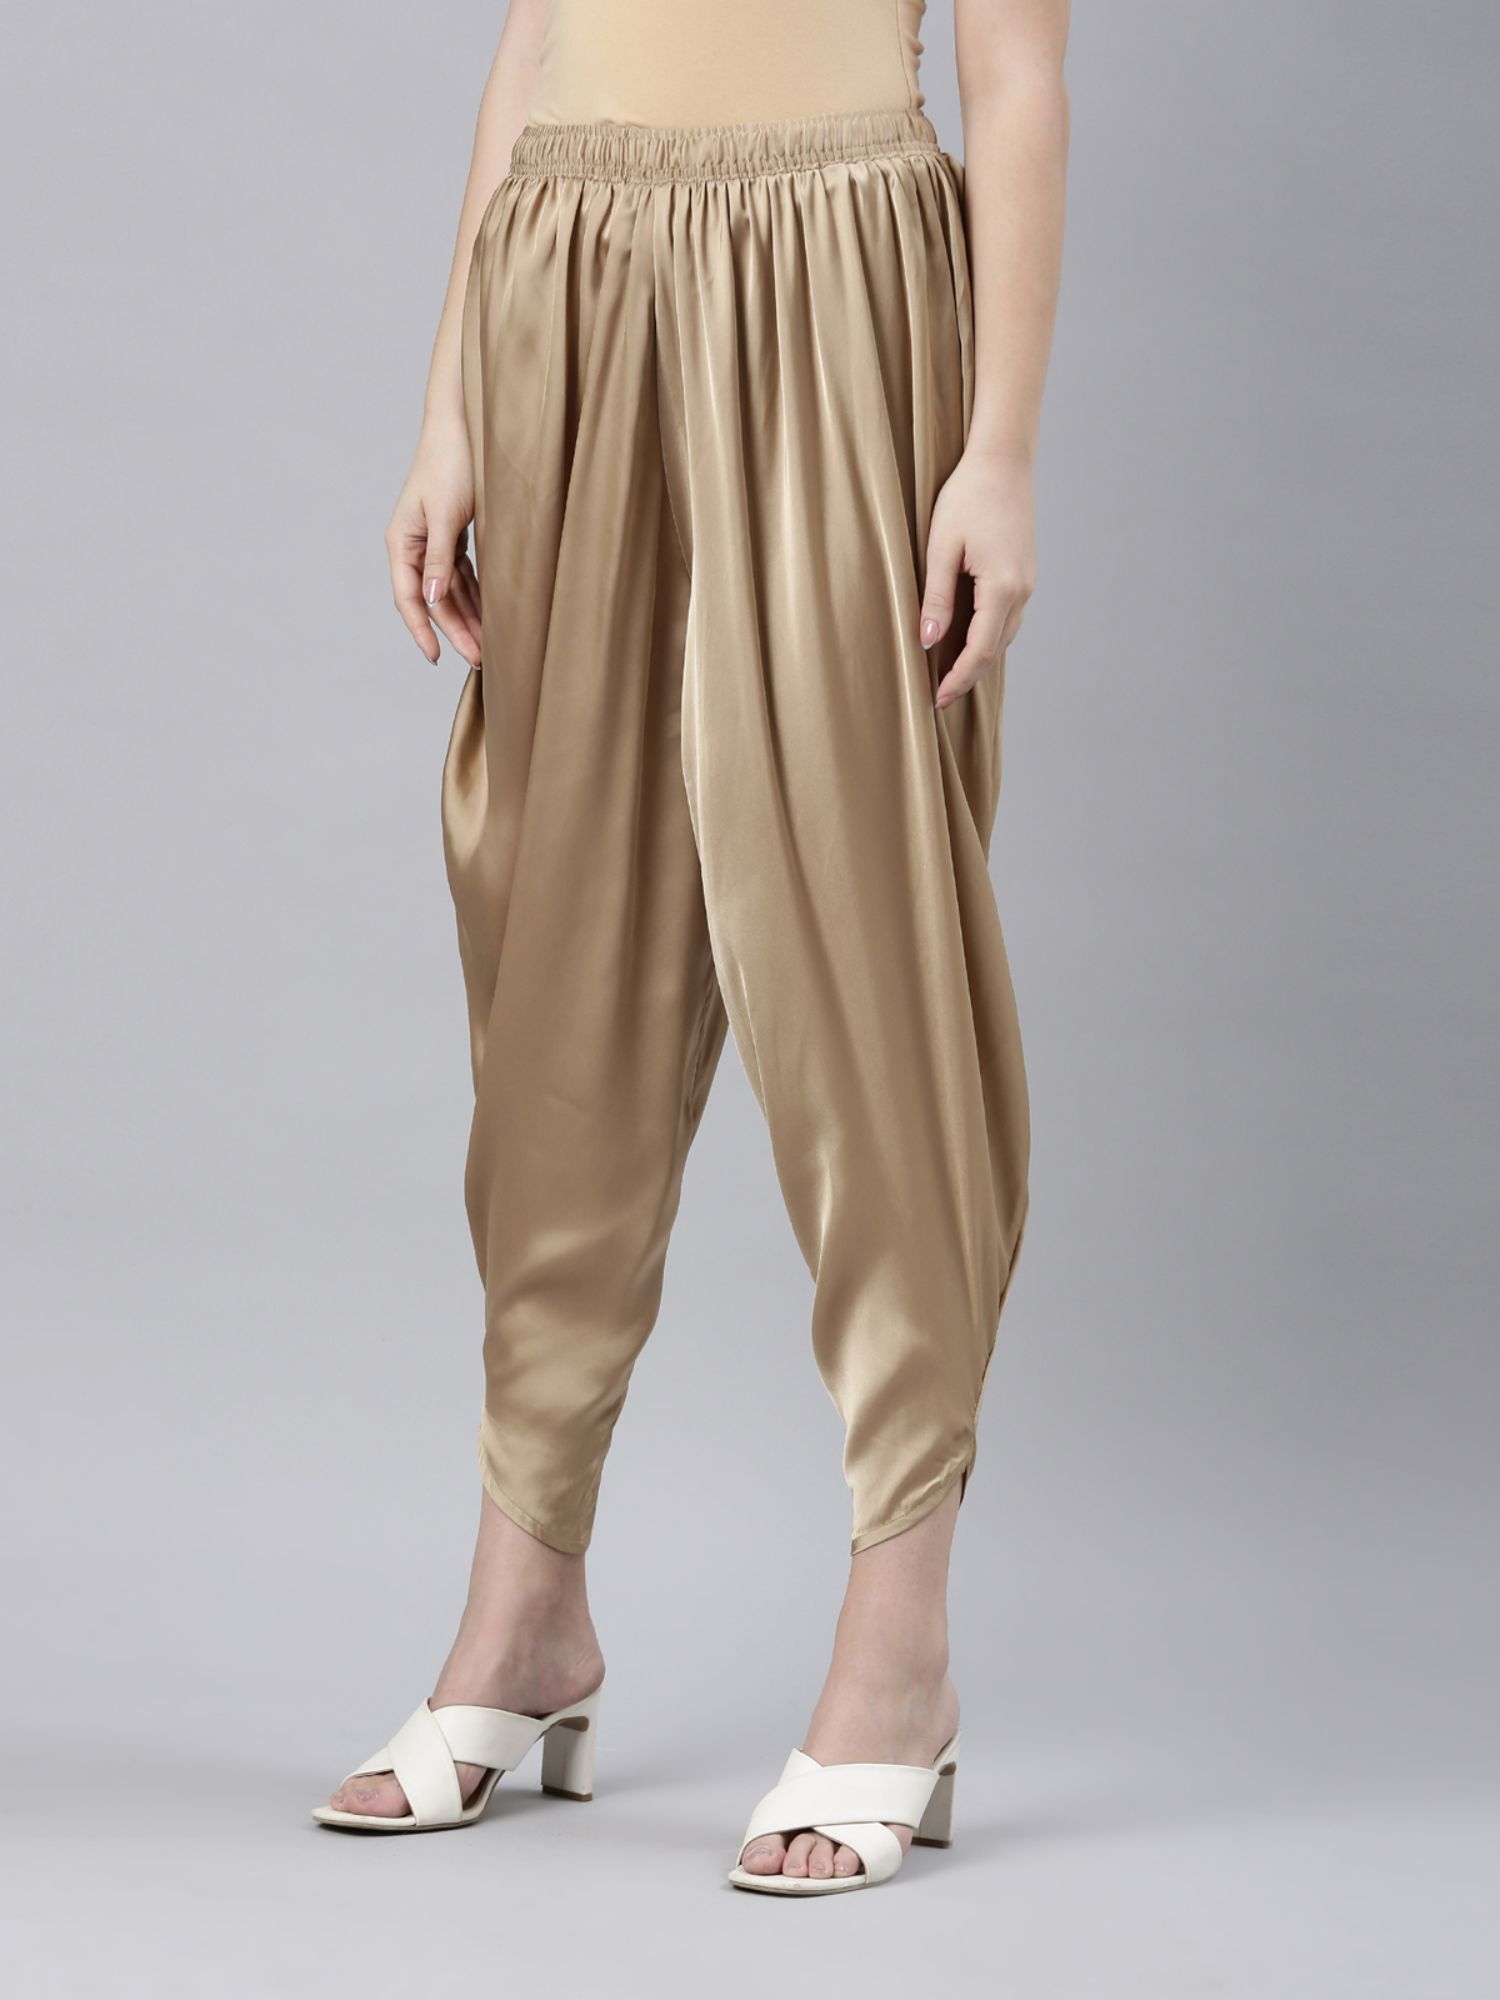 Go Colors Women Solid Gold Viscose Harem Pants Buy Go Colors Women Solid  Gold Viscose Harem Pants Online at Best Price in India  Nykaa